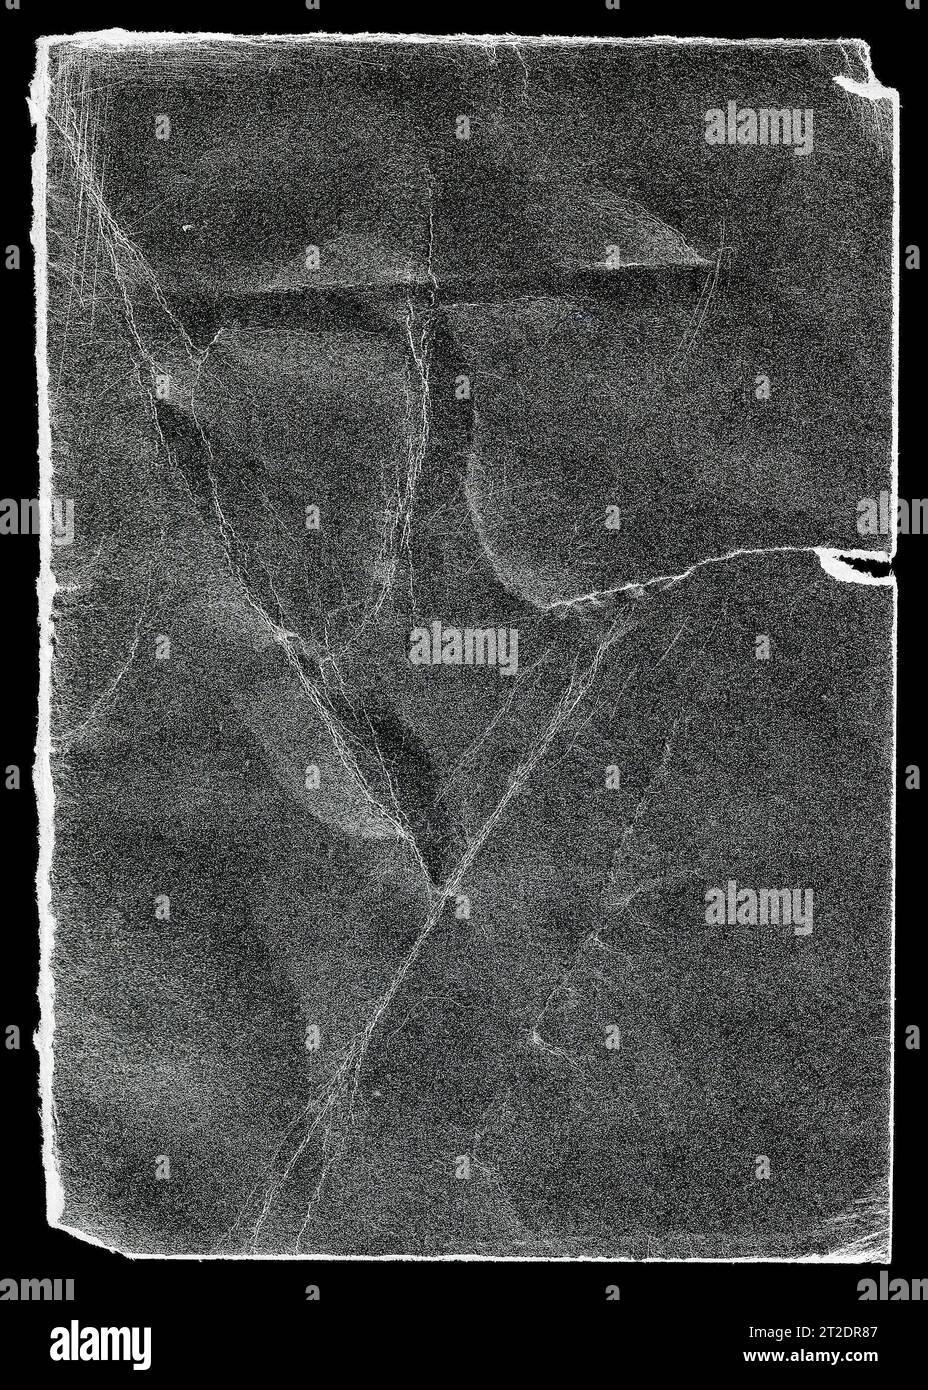 Texture of old surface on black background with white scratches, stamp texture with effect grunge, damaged, noise effects dirty overlays multiply Stock Photo